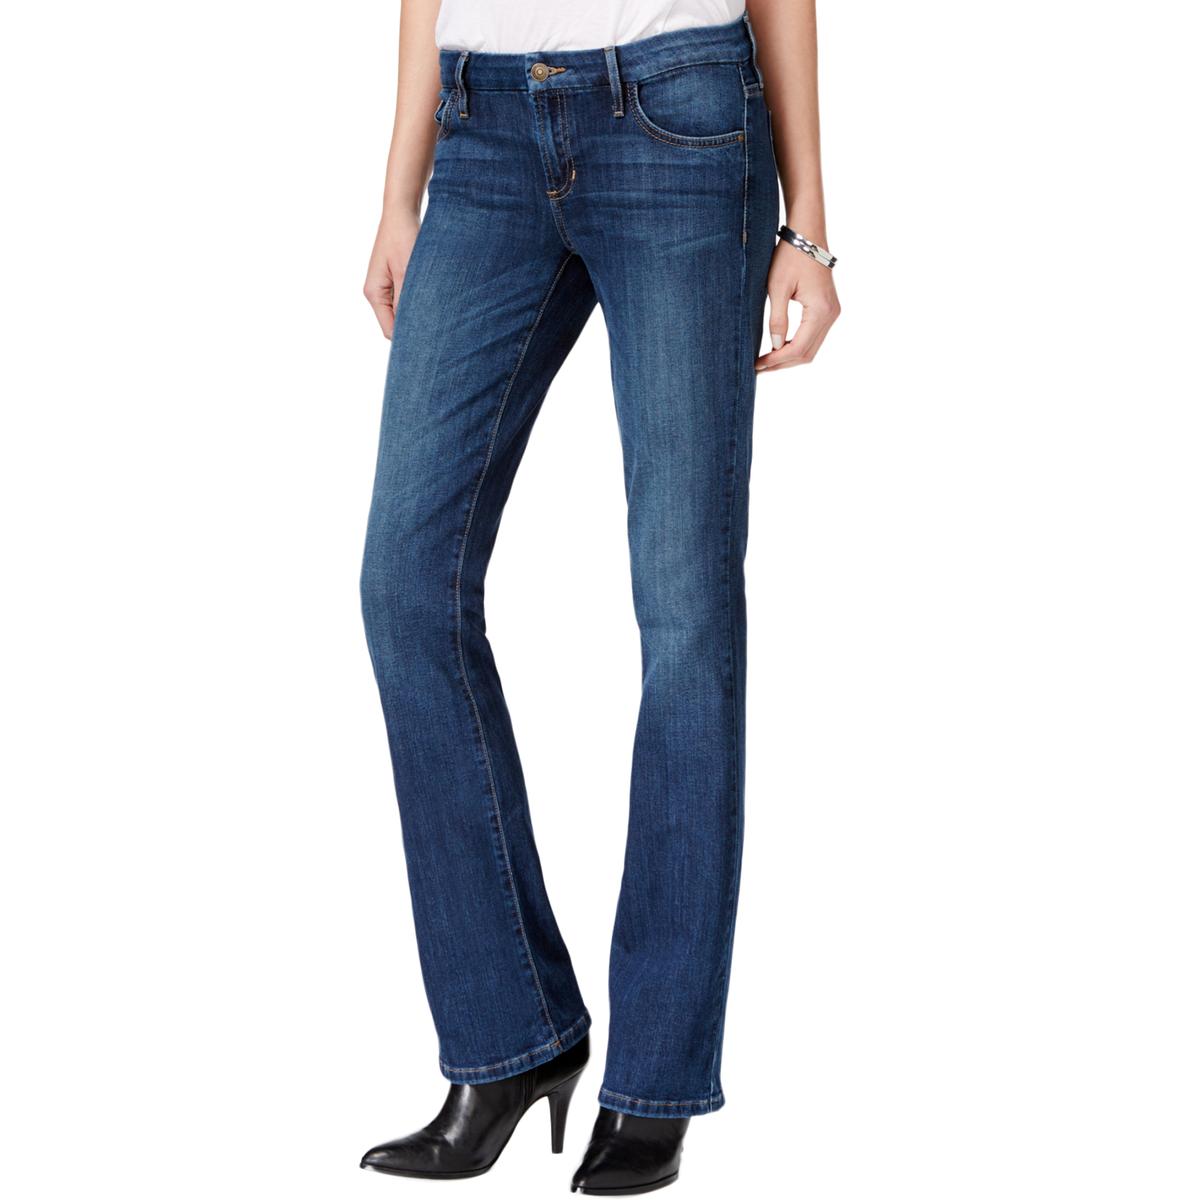 Guess Womens Navy Denim Mid-Rise Slim Fit Bootcut Jeans 24 Short BHFO ...